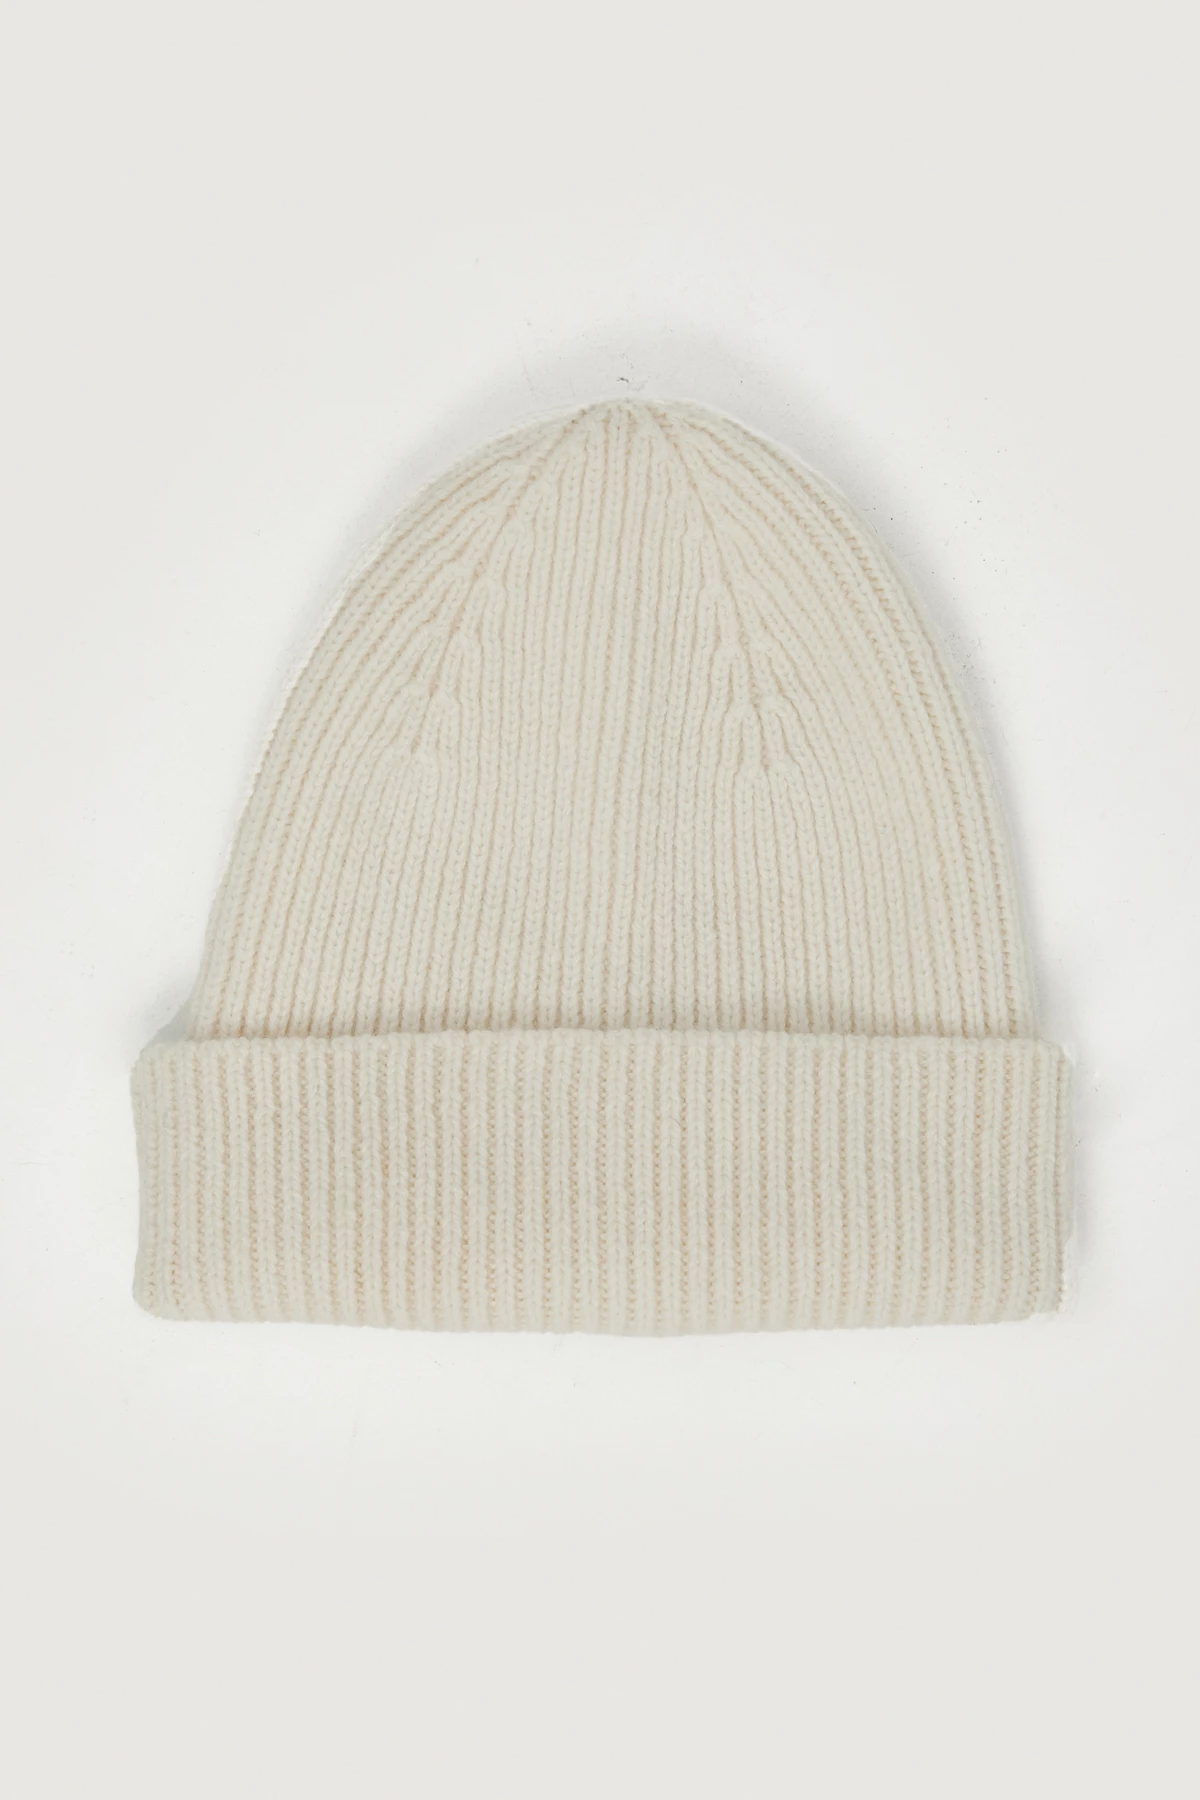 Knitted milky cashmere beanie hat with lapel, photo 4